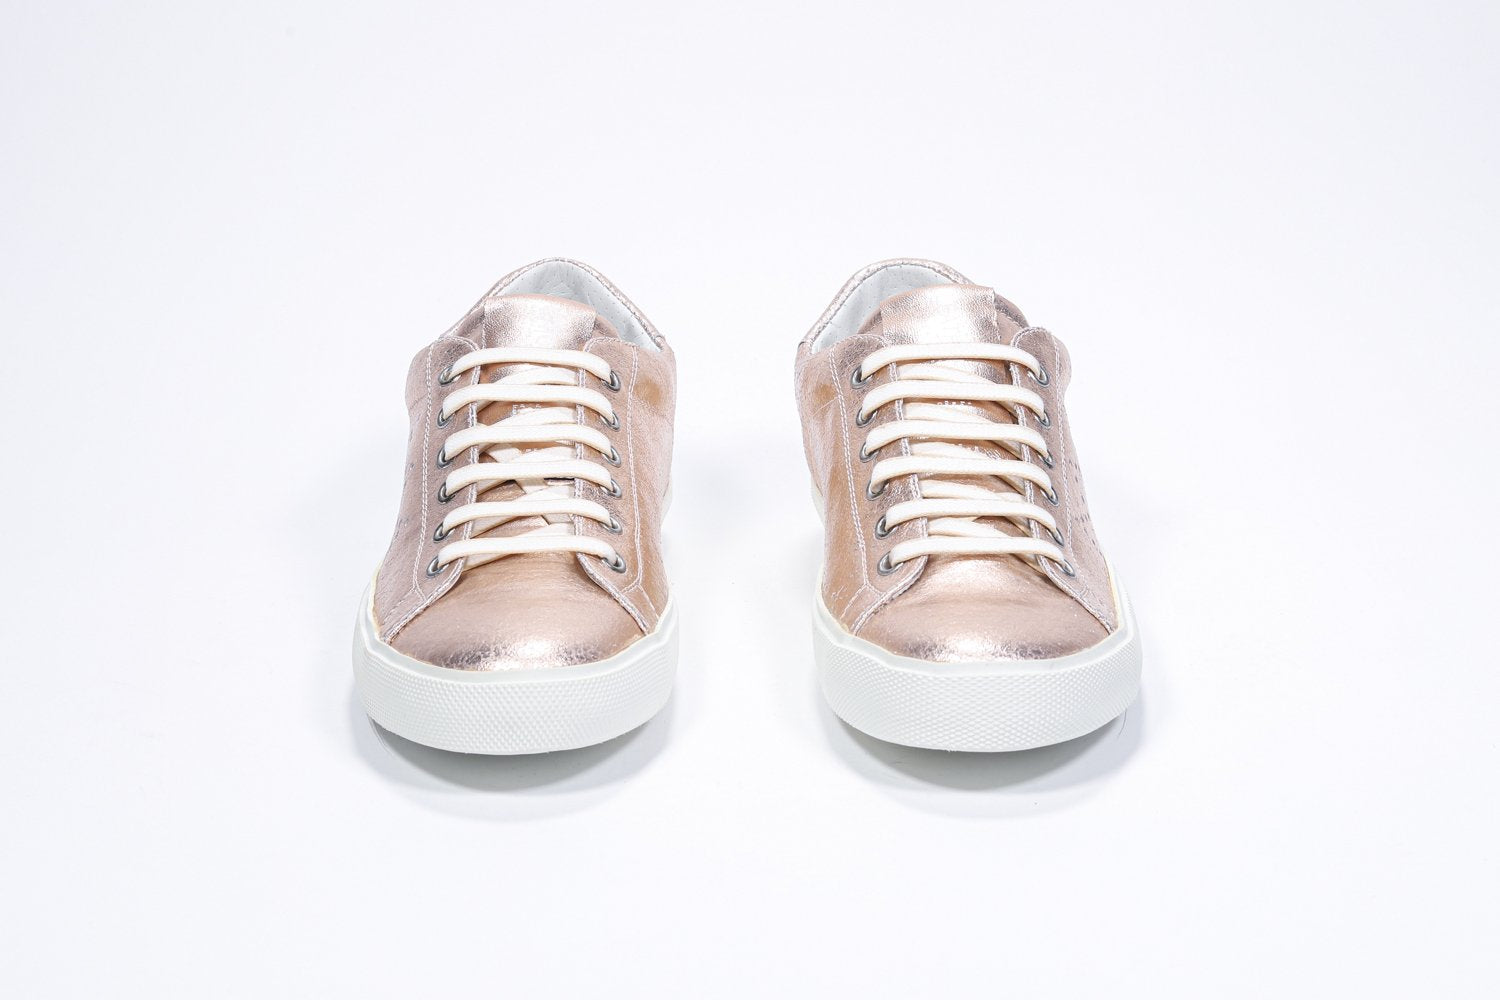 Front view of low top rose-gold sneaker with perforated crown logo on upper. Full metallic leather upper and white rubber sole.